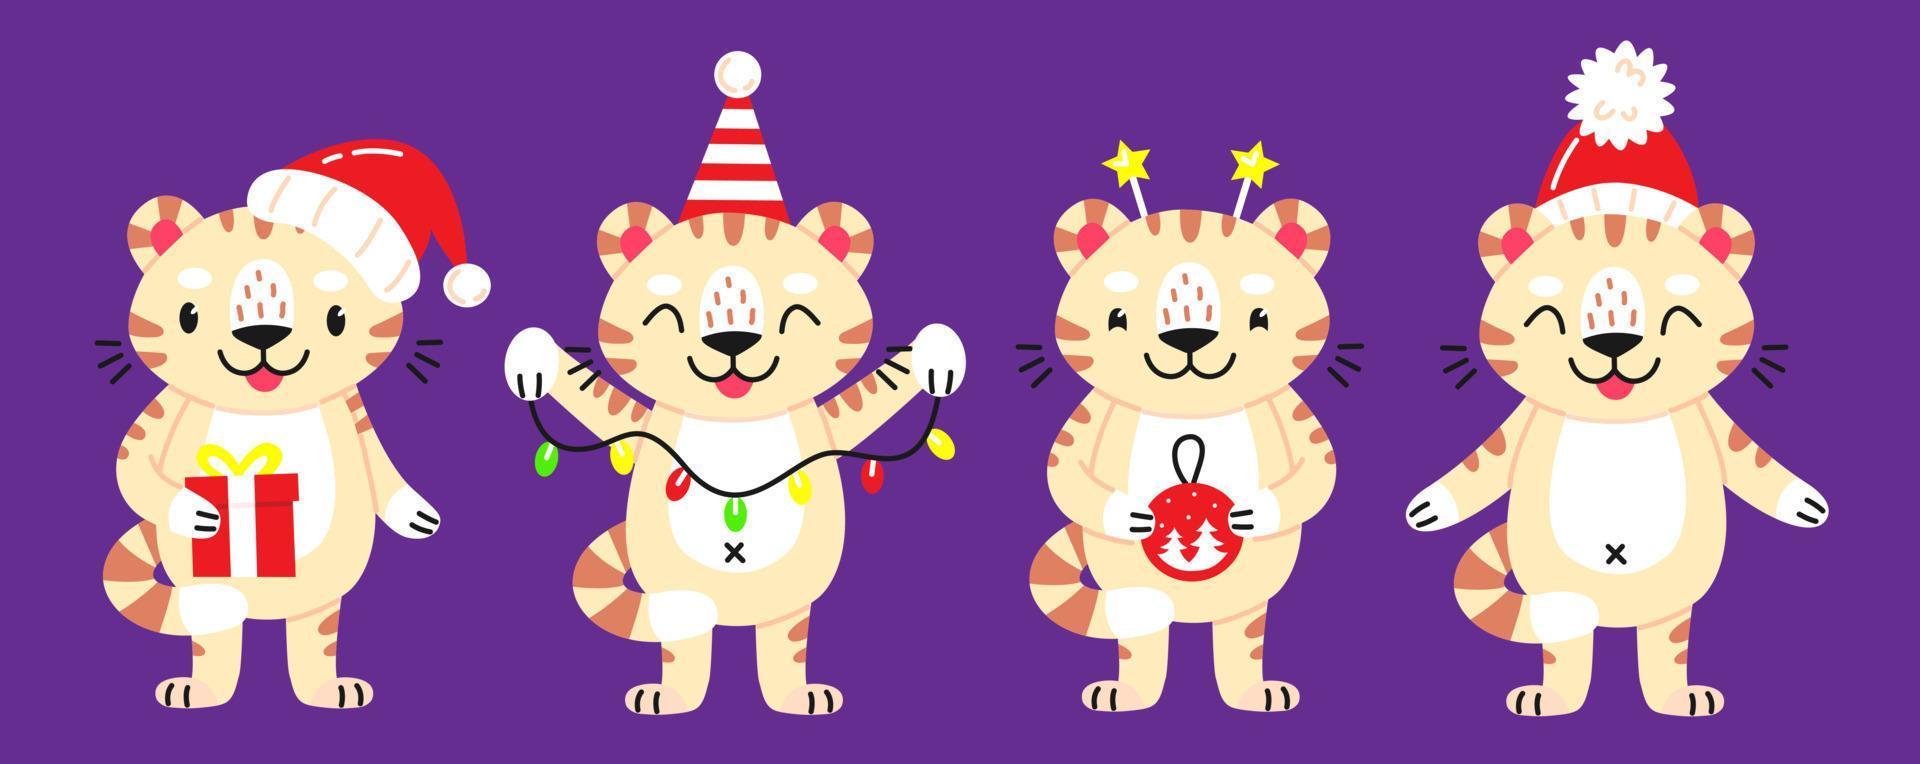 New Year's set with characters of tigers. Collection of cute animals white tiger cubs in cartoon style in Christmas hats, with a garland. Vector illustration isolated on background.